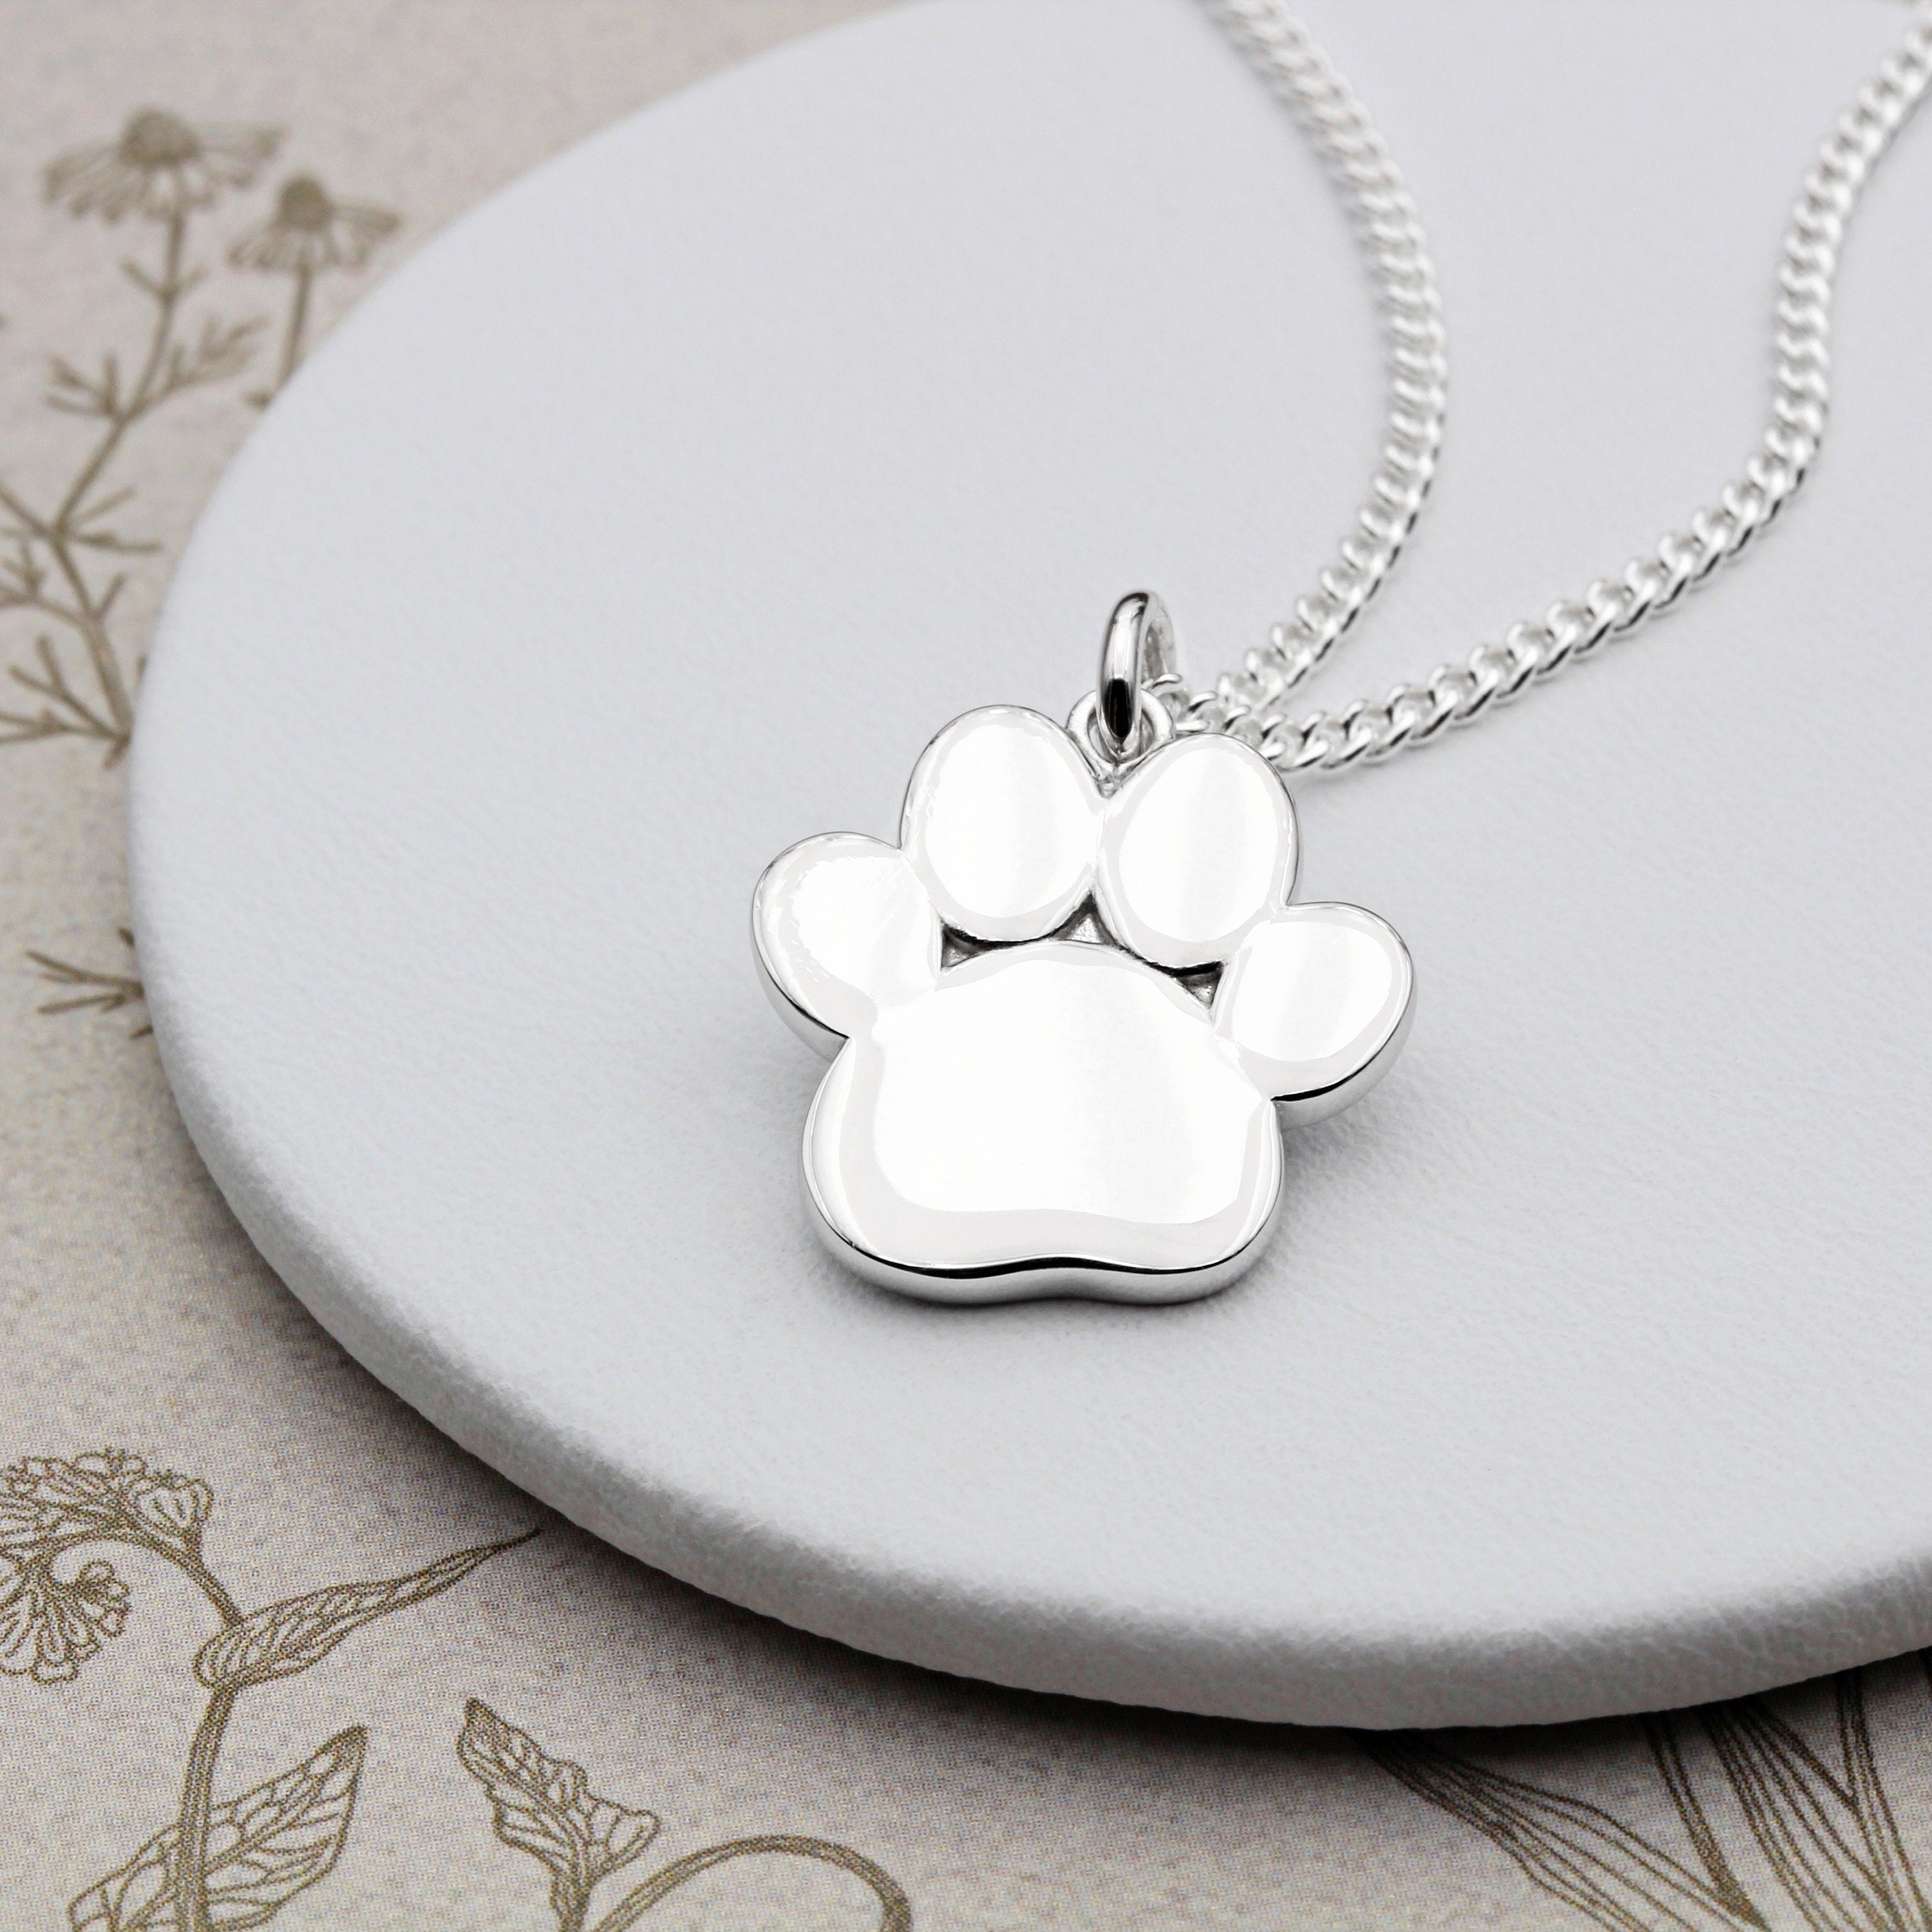 ONEFINITY Dog Paw Print Necklace Sterling Silver Heart Pendant Jewelry for  Women Girls - Walmart.com